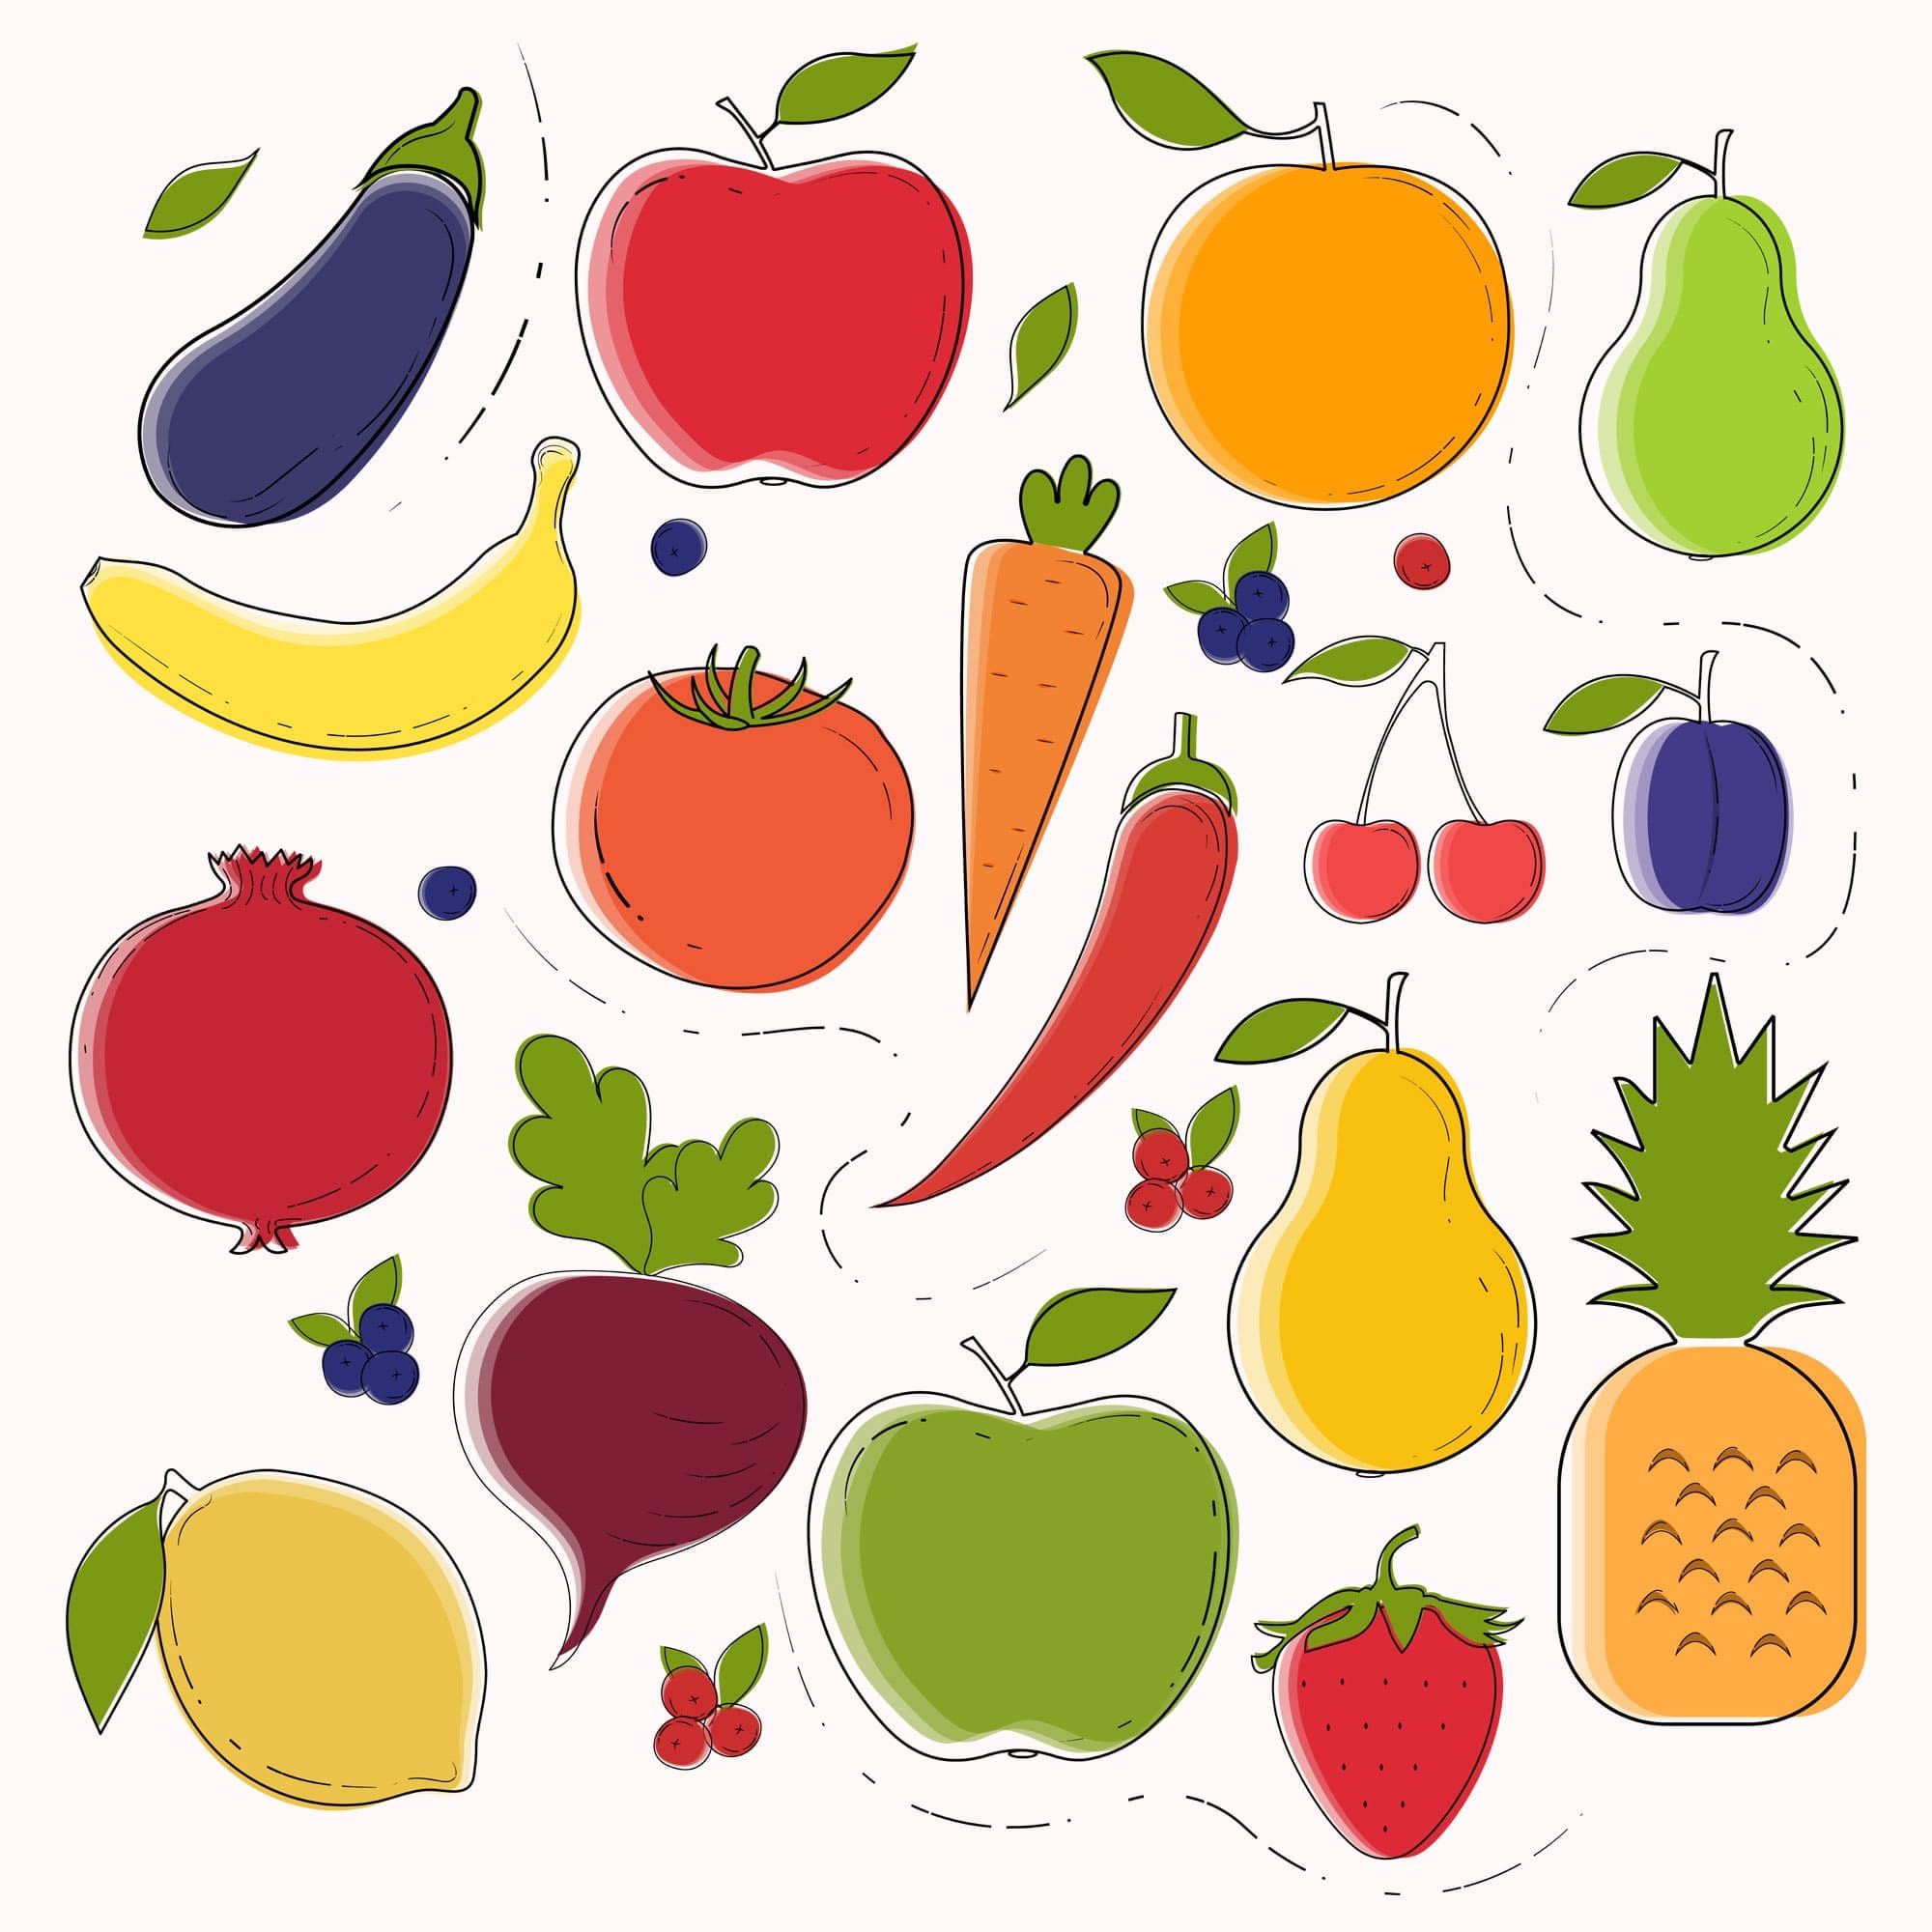 Colored vegetables and fruits drawn on a white background.